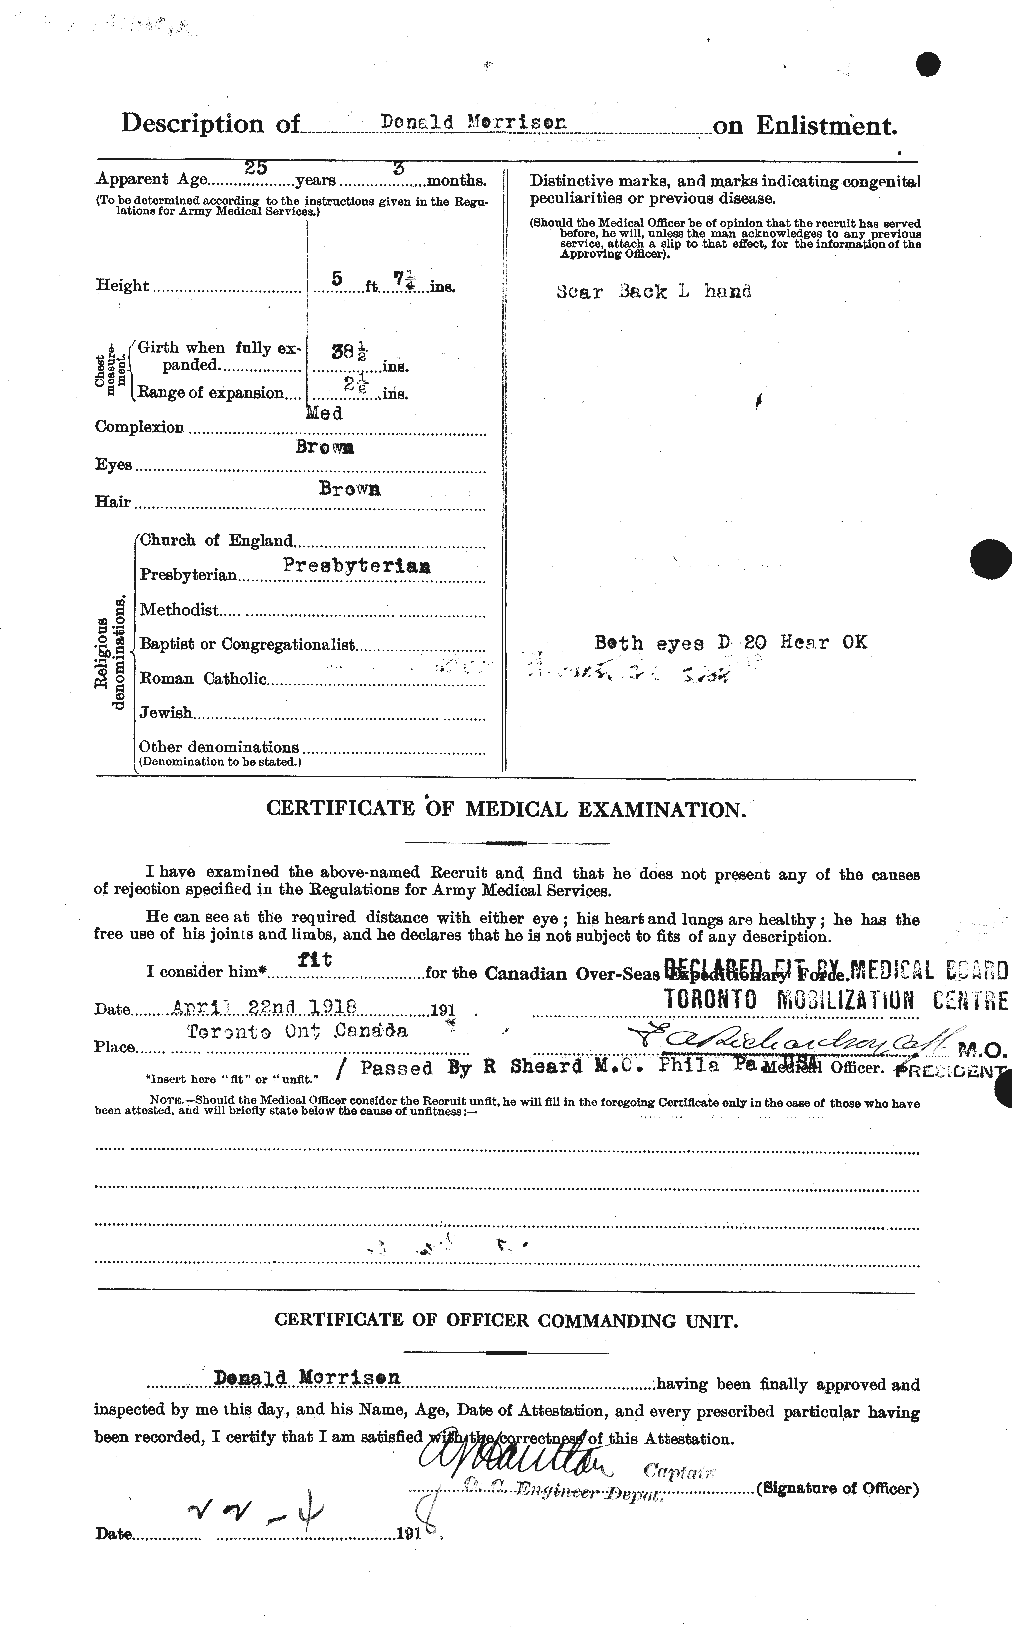 Personnel Records of the First World War - CEF 505433b